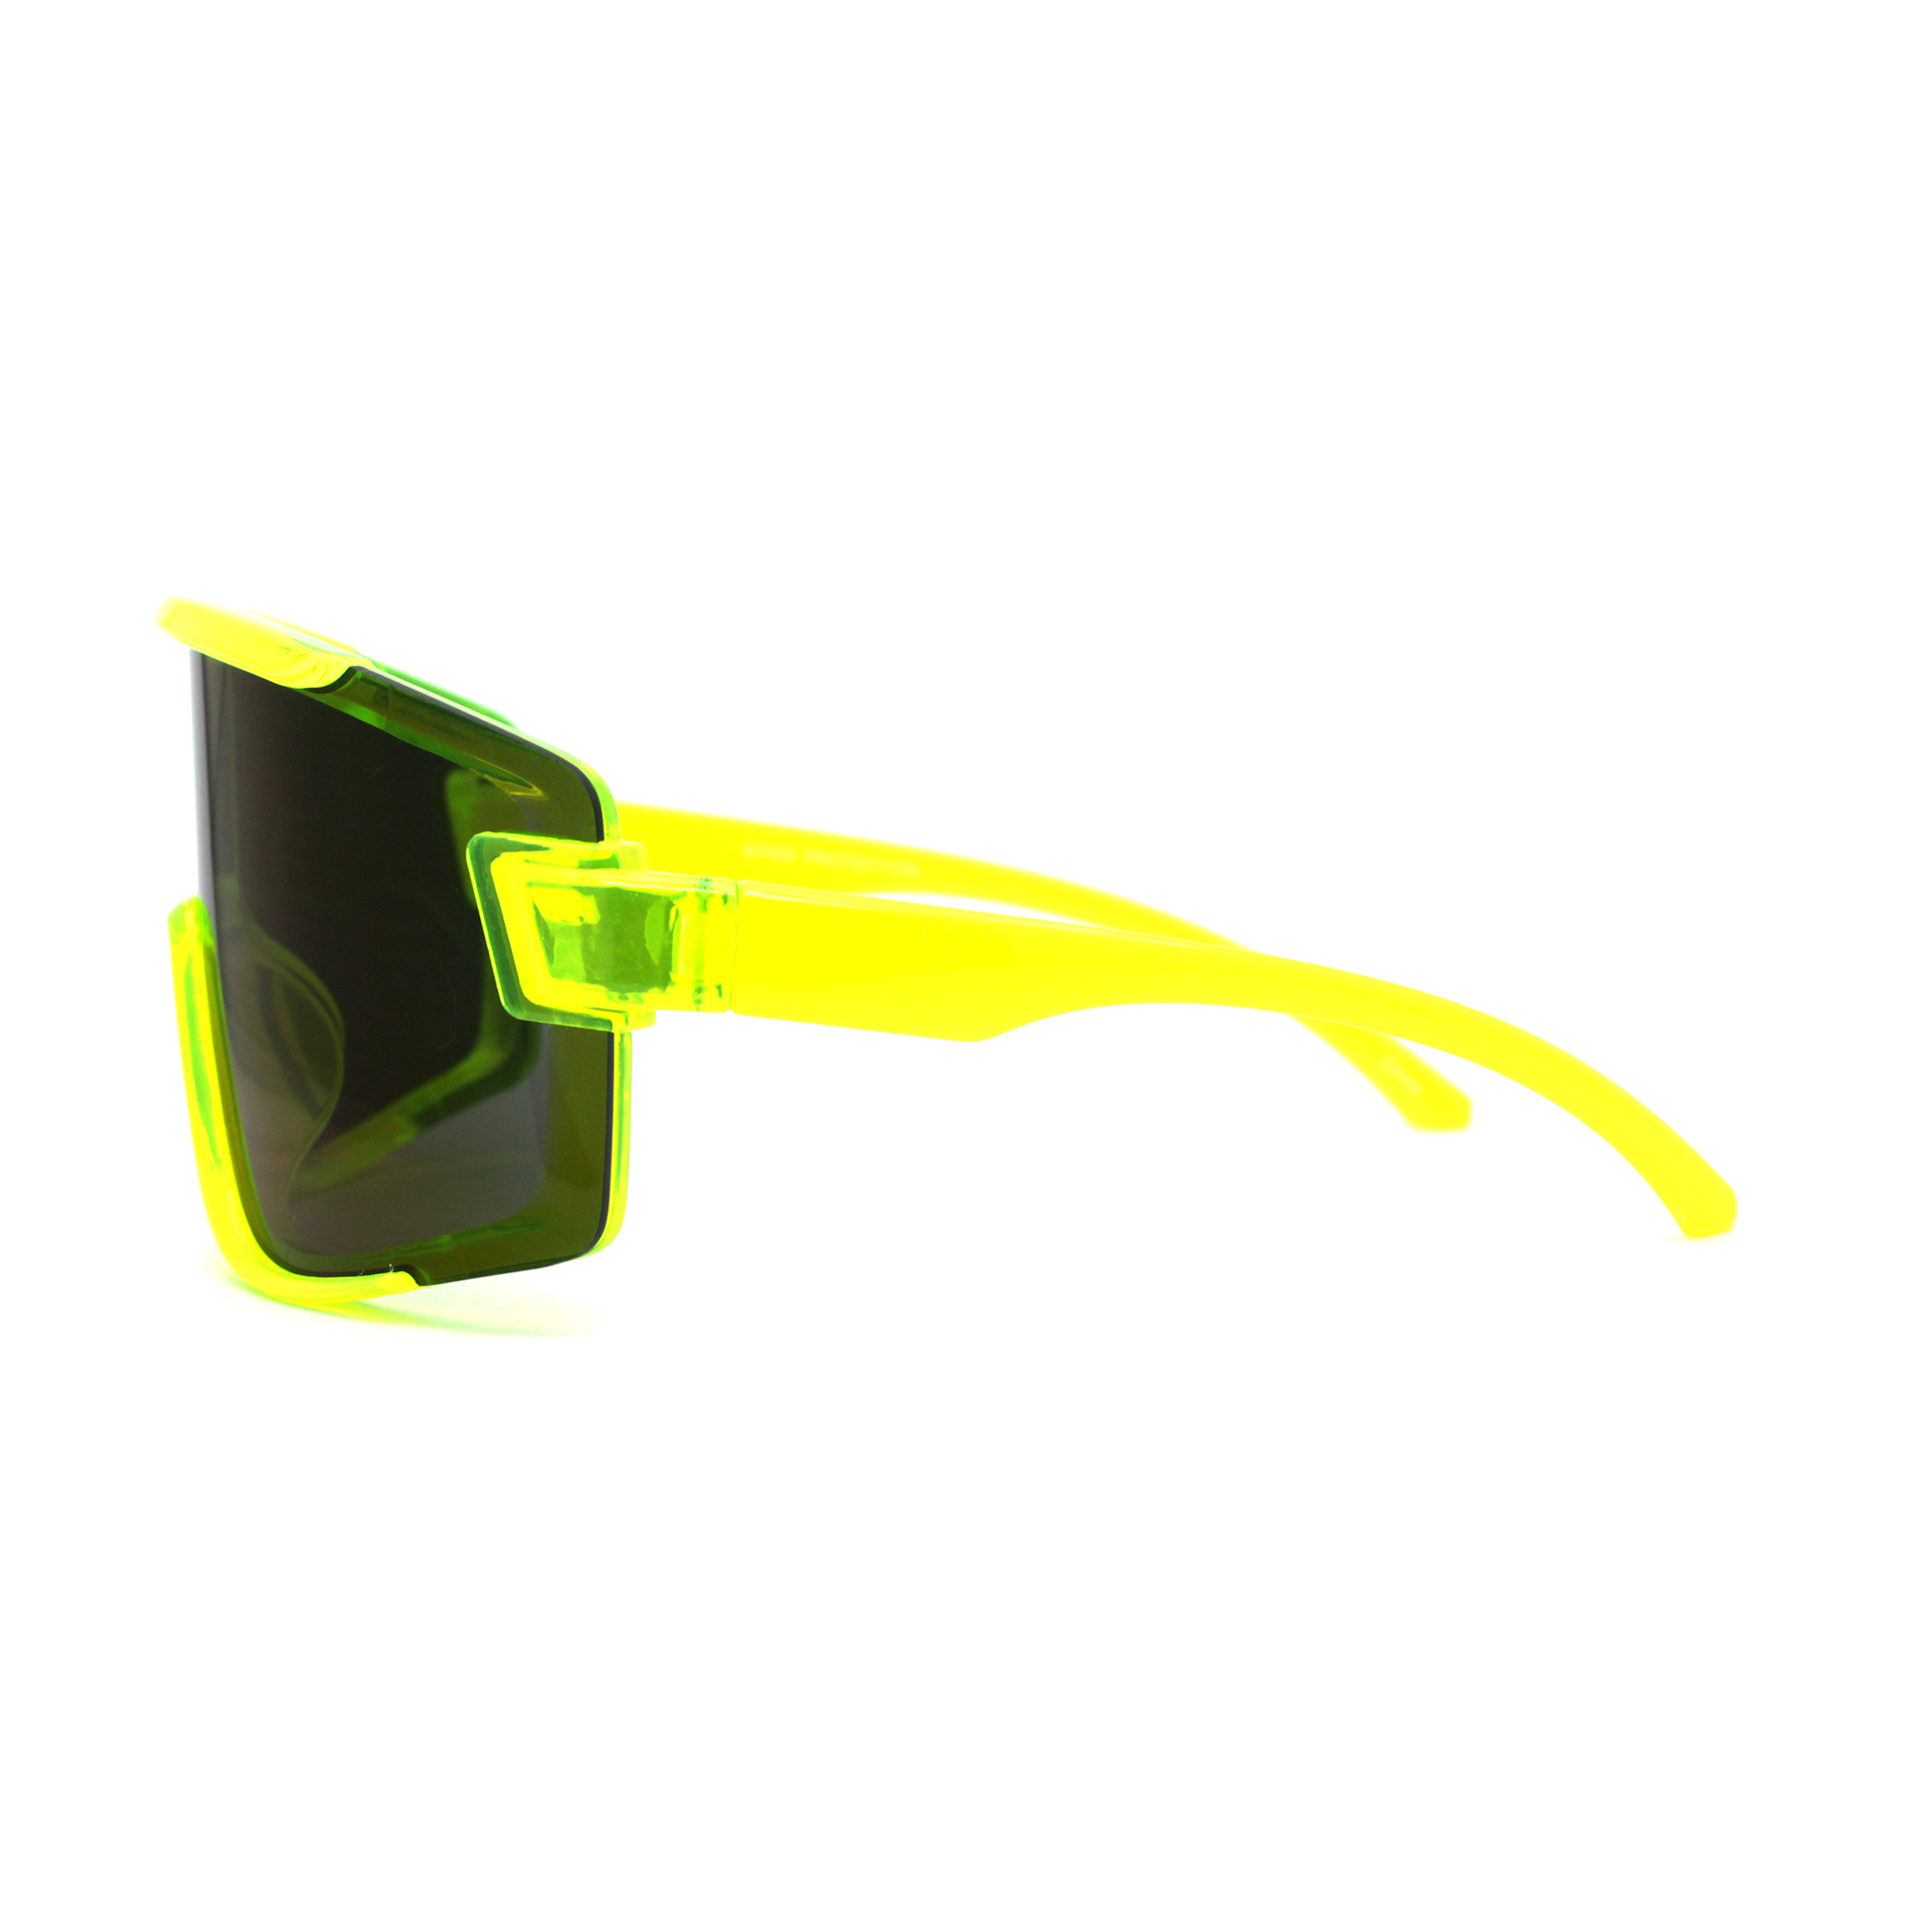 Mens Color Mirror Exposed Lens Large Shield Sunglasses Yellow Blue Mirror - image 3 of 4